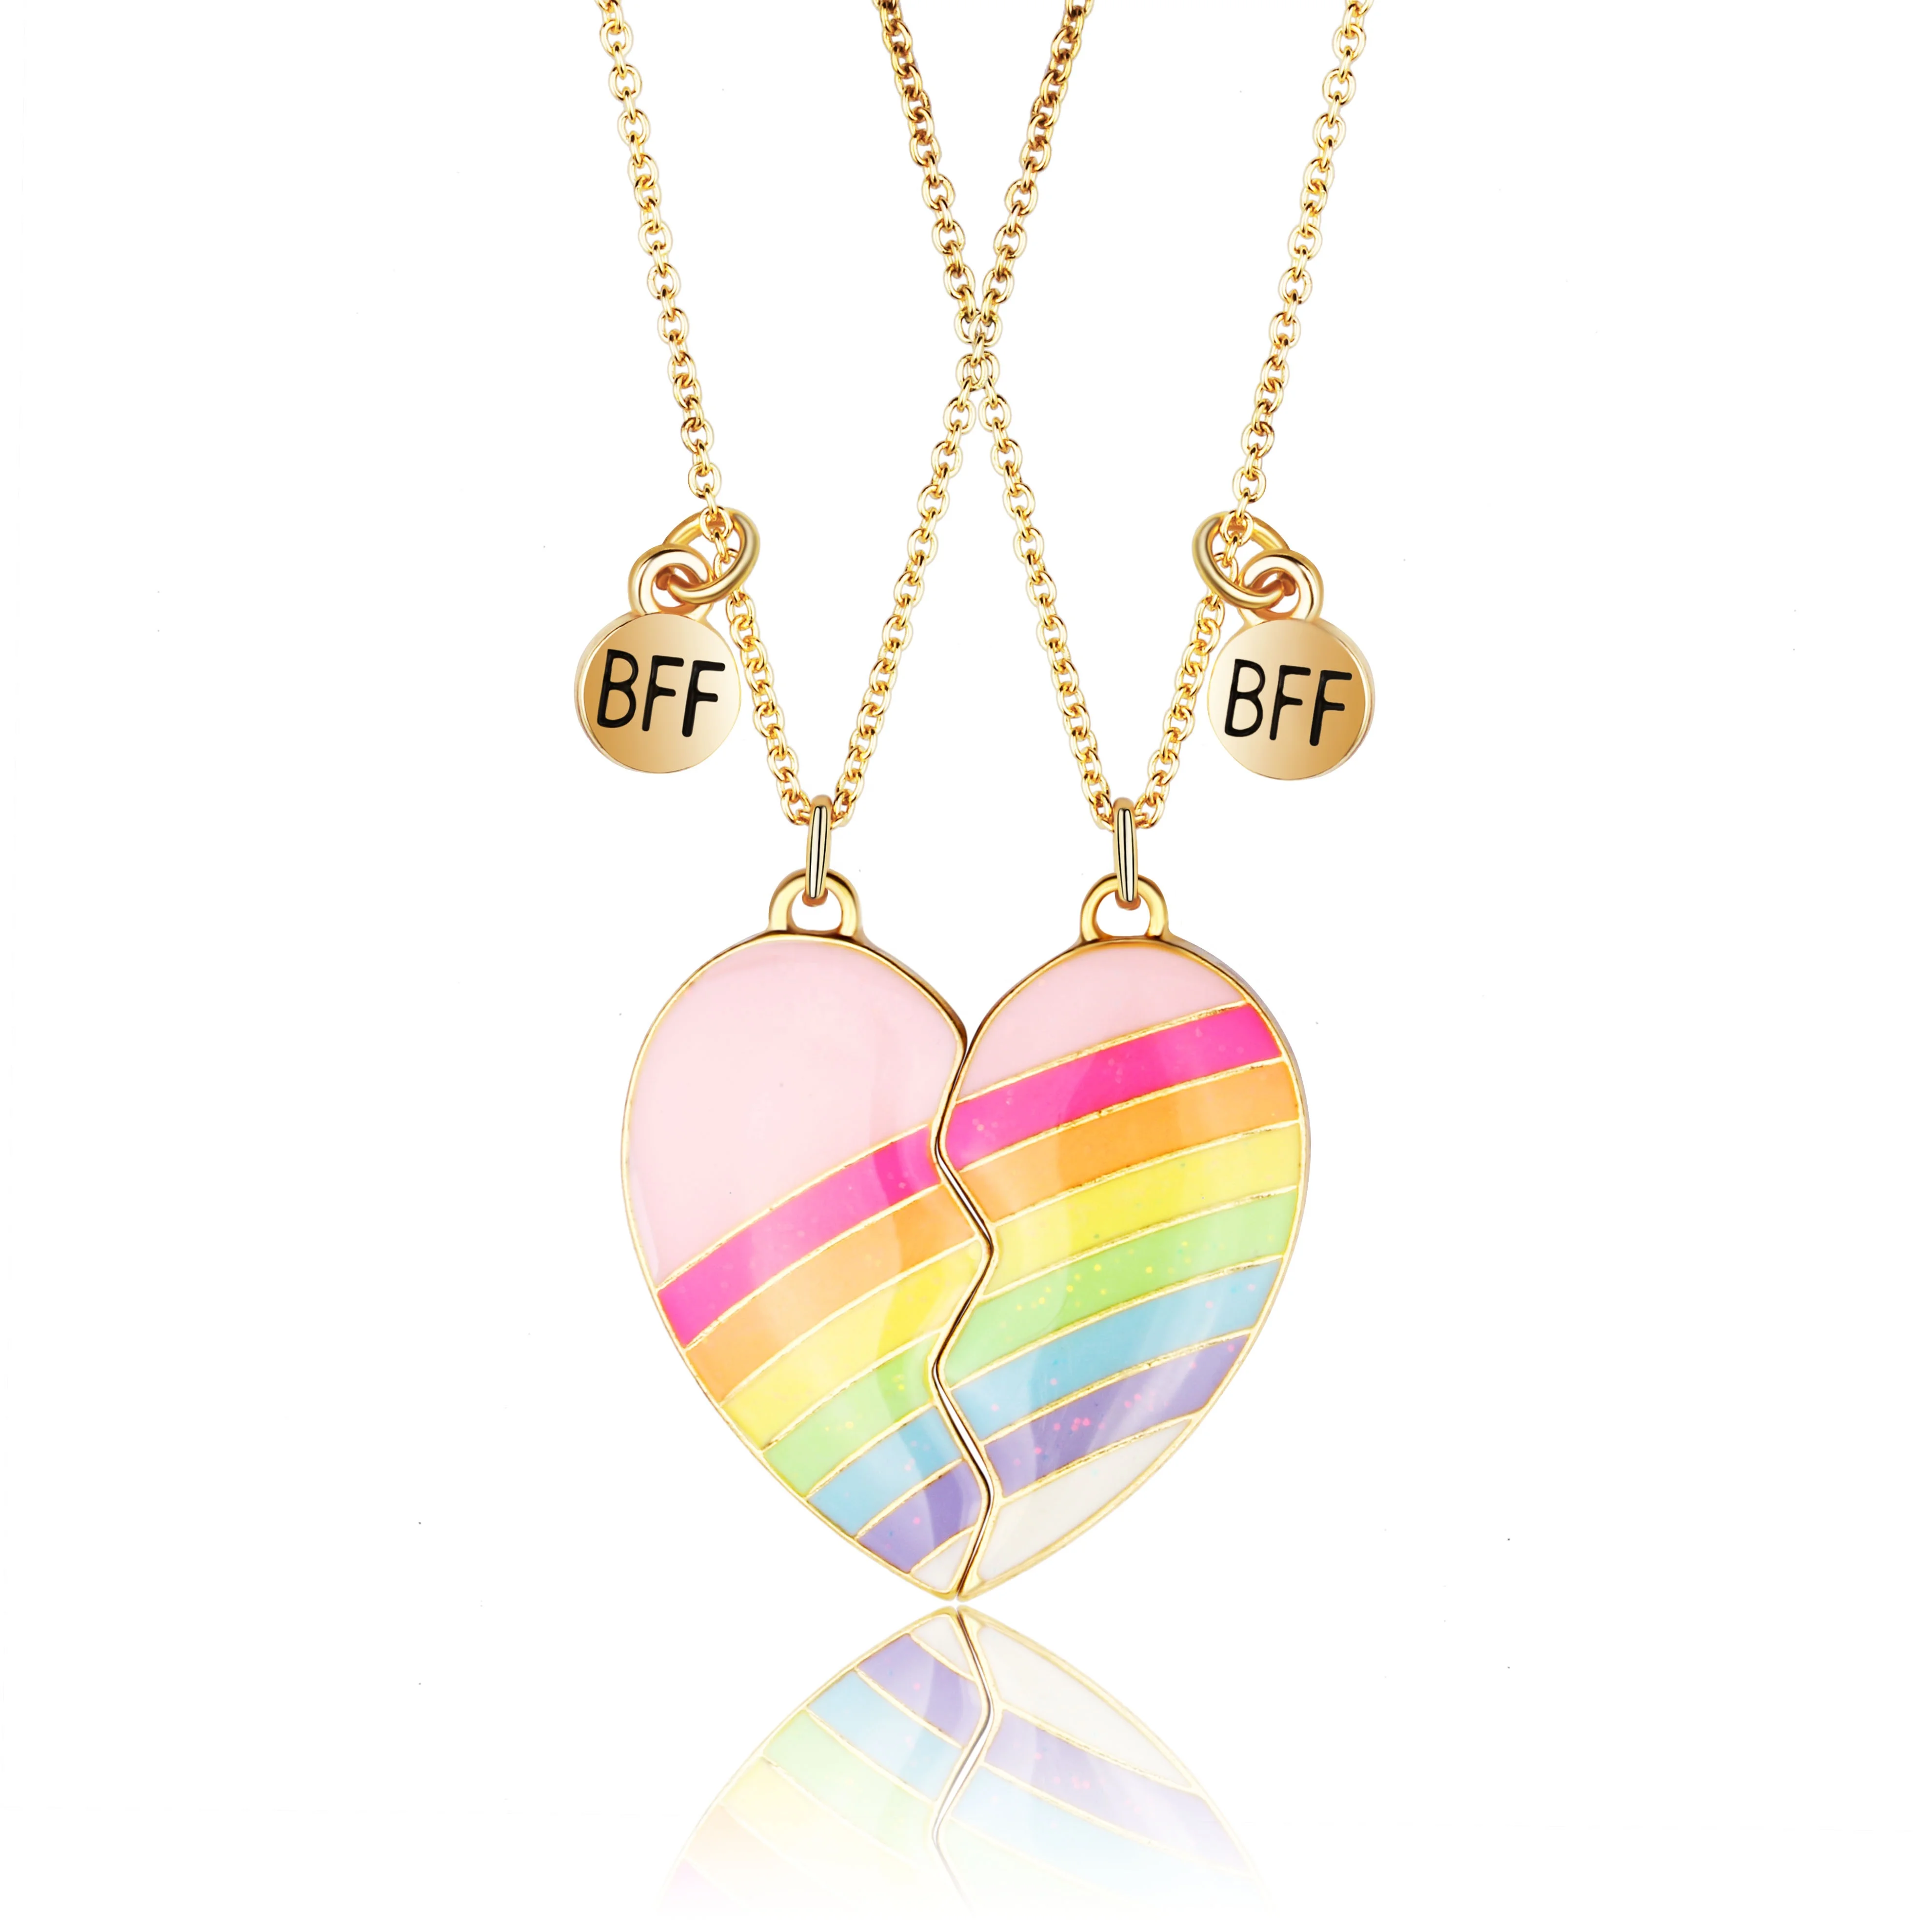 2/3/4 Packs BFF Best Friends Forever Tags Kids Pendant Necklace Set (15  Packs Mix) : Amazon.in: Jewellery